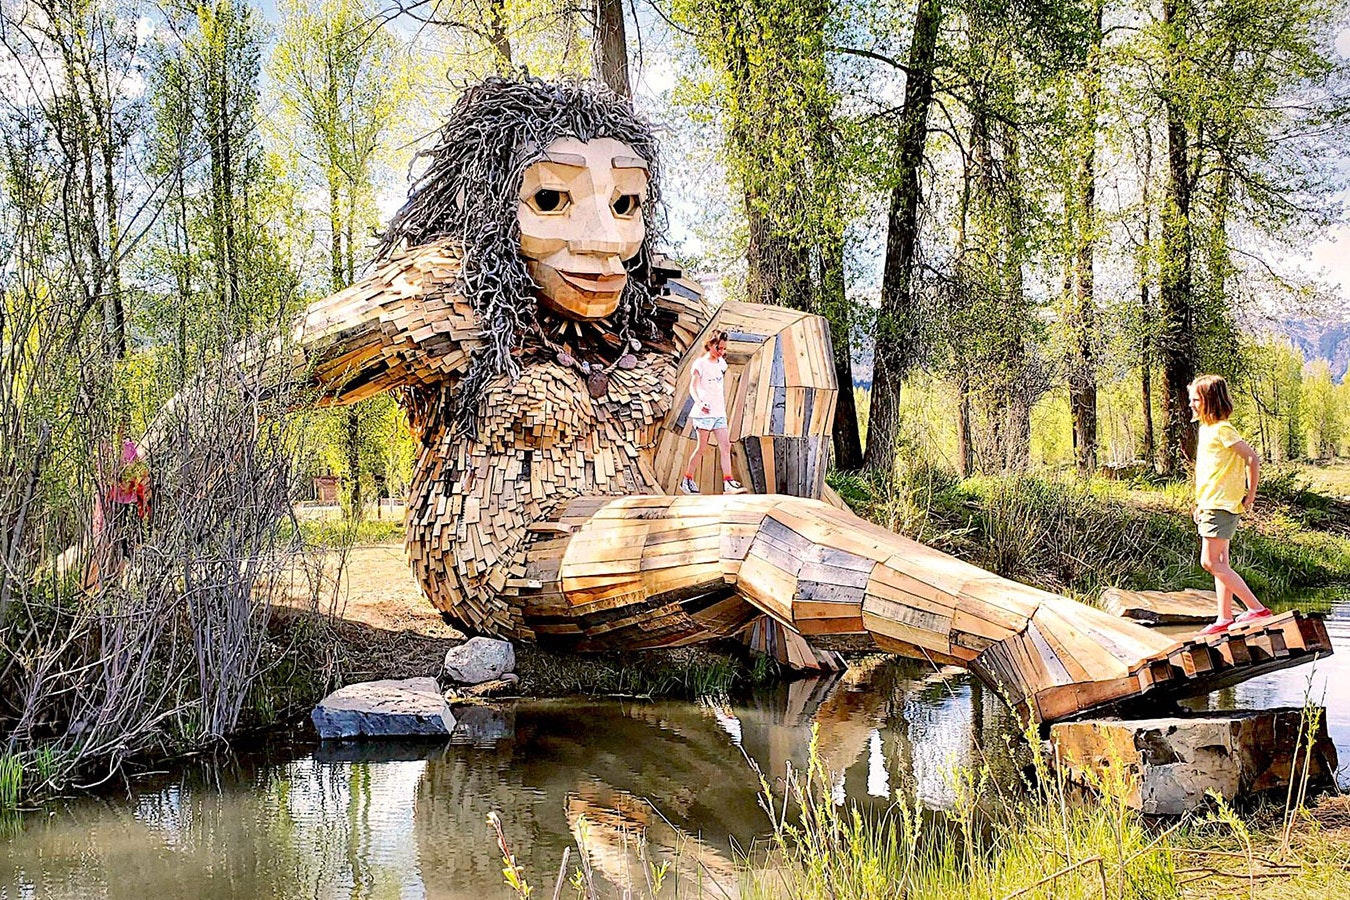 Mama Mimi is a giant troll made of reclaimed and recycled wood in Jackson, Wyoming.